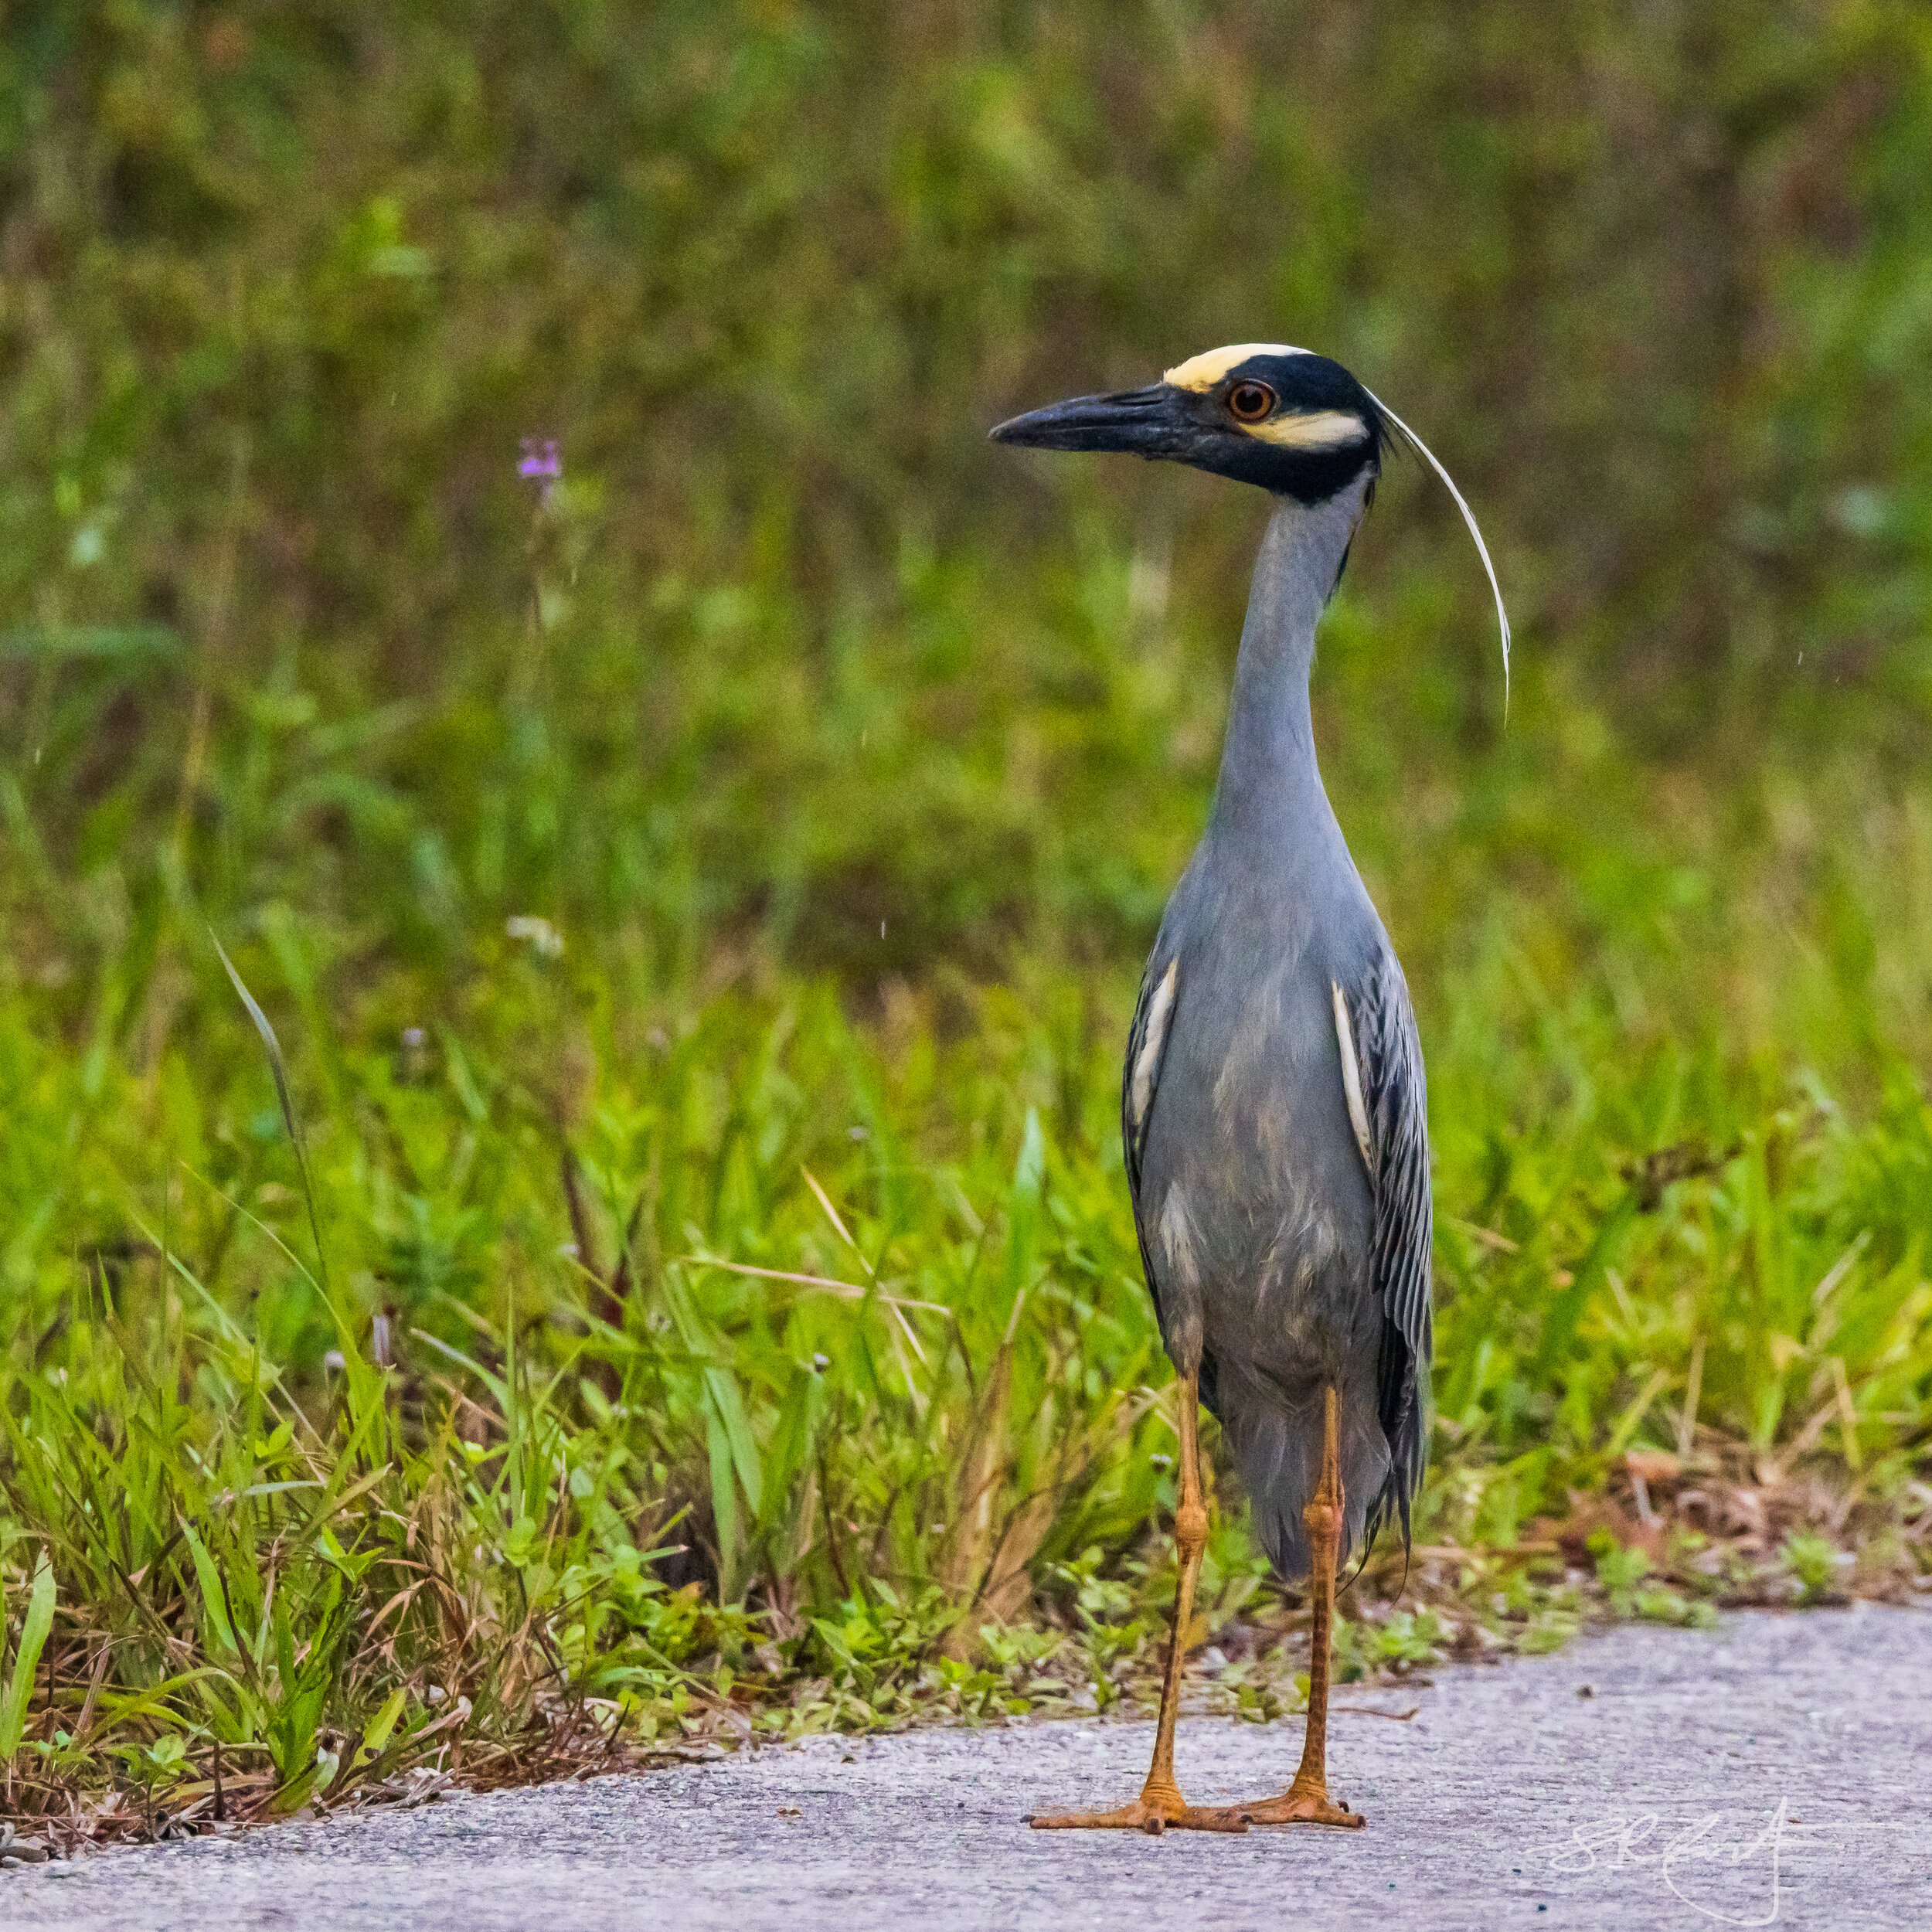 Yellow-crowned Night Heron, "just a walking down the road...."